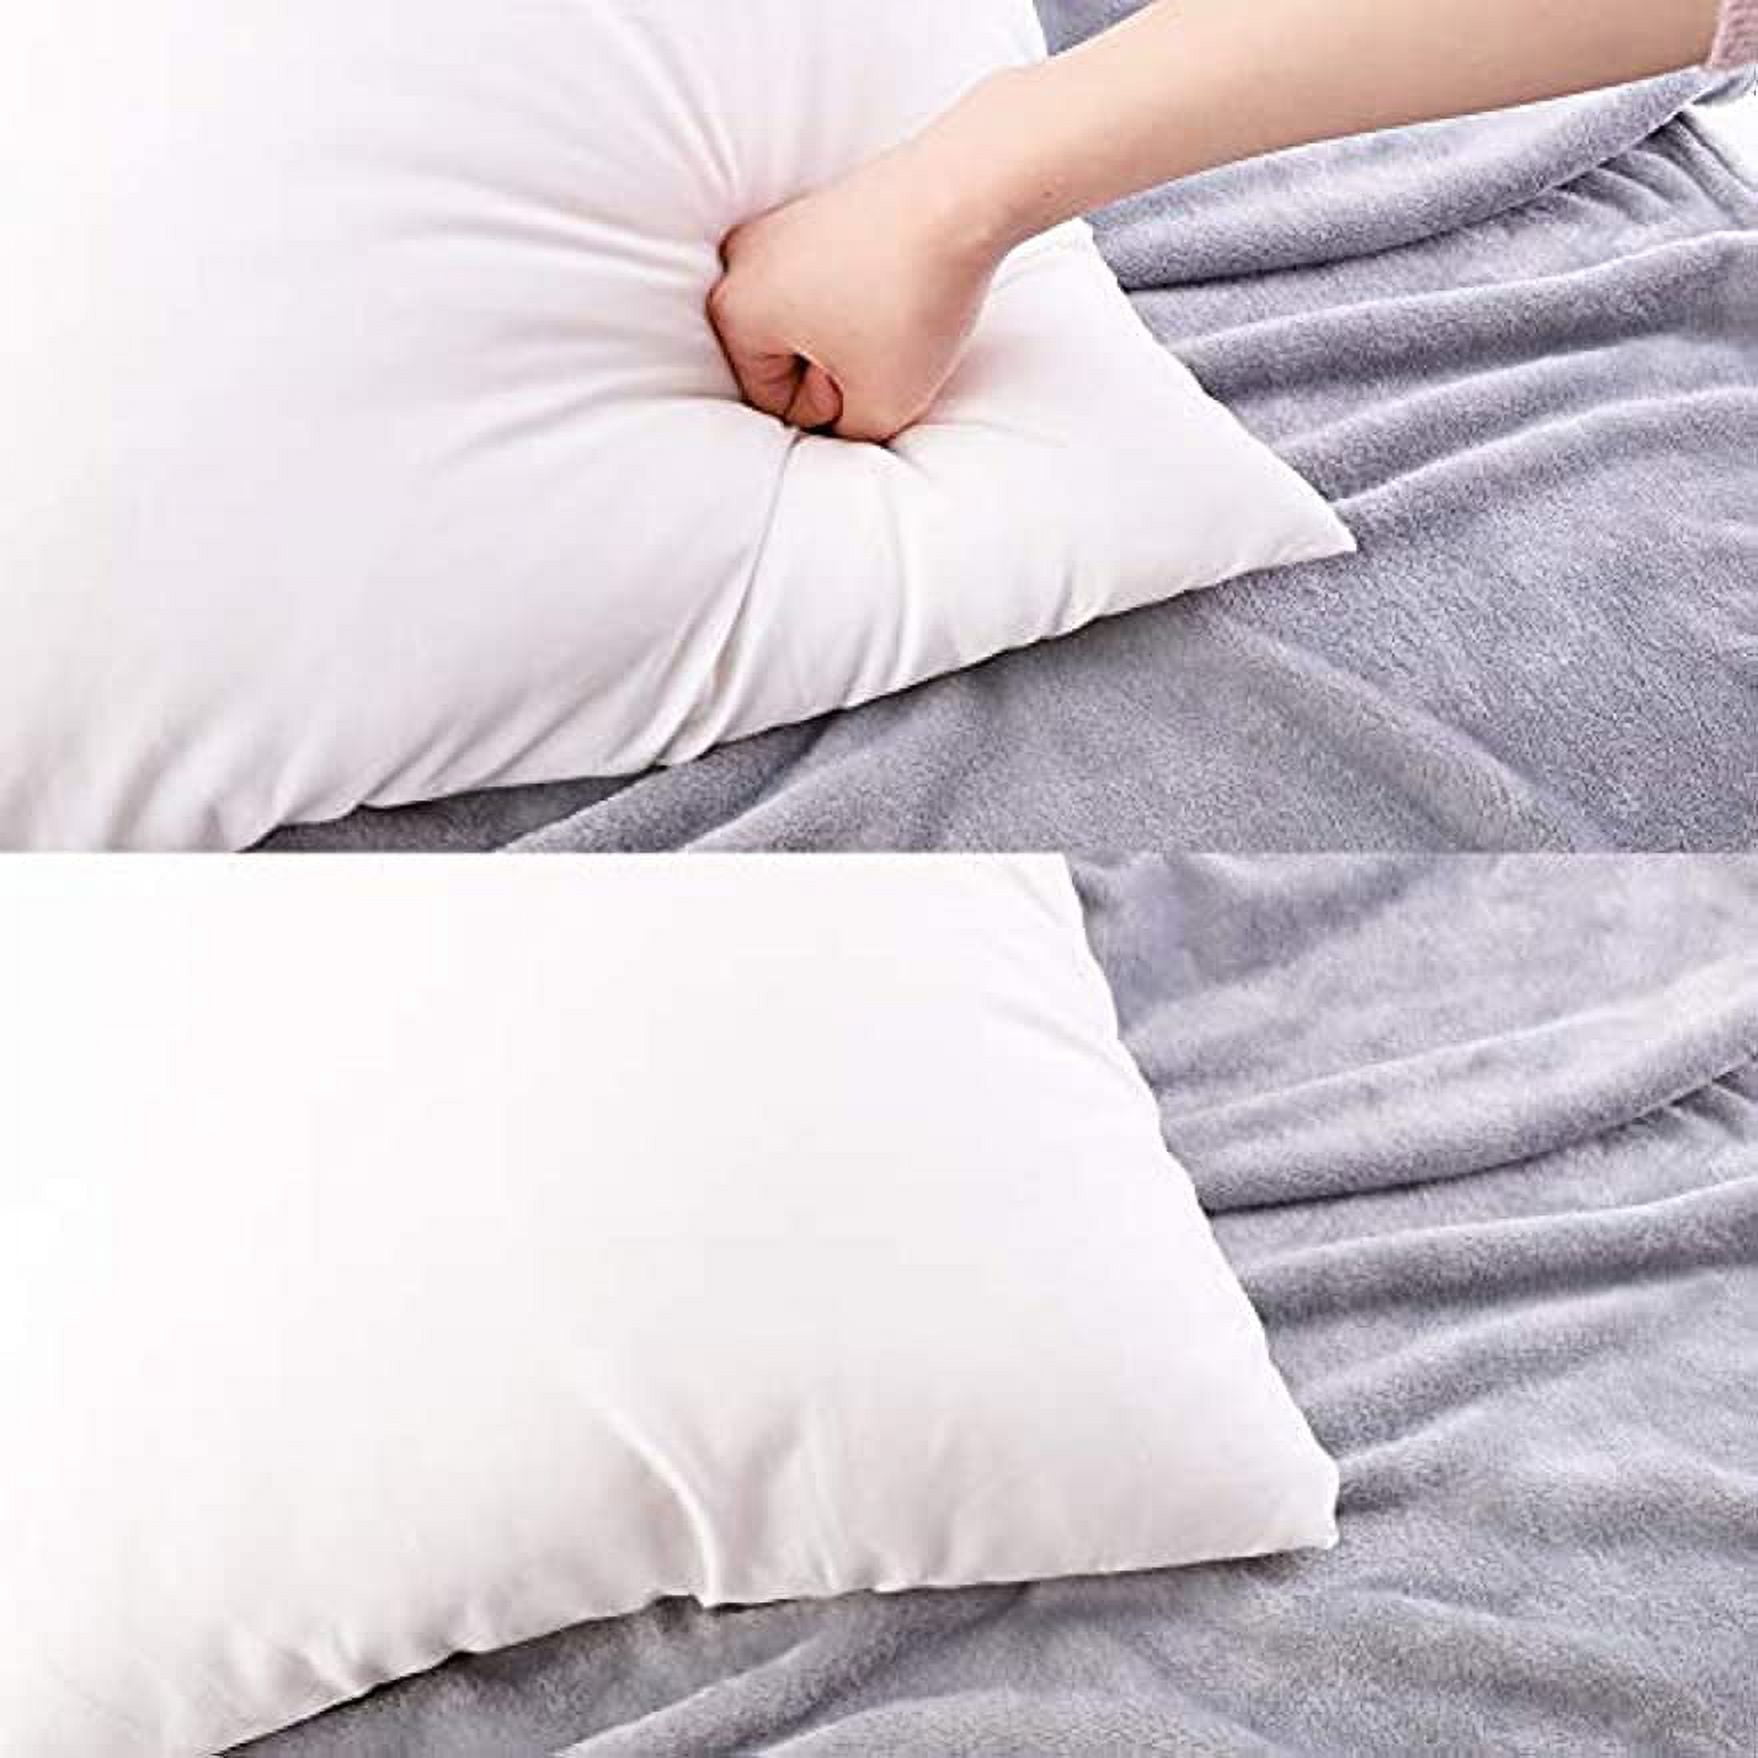  QSWRD 18 x 18 Pillow Inserts Set of 1 Outdoor Pillow Inserts  Waterproof Square Premium Throw Pillow Inserts Decorative Couch Pillow  Inserts White Sofa Pillows Indoor : Home & Kitchen